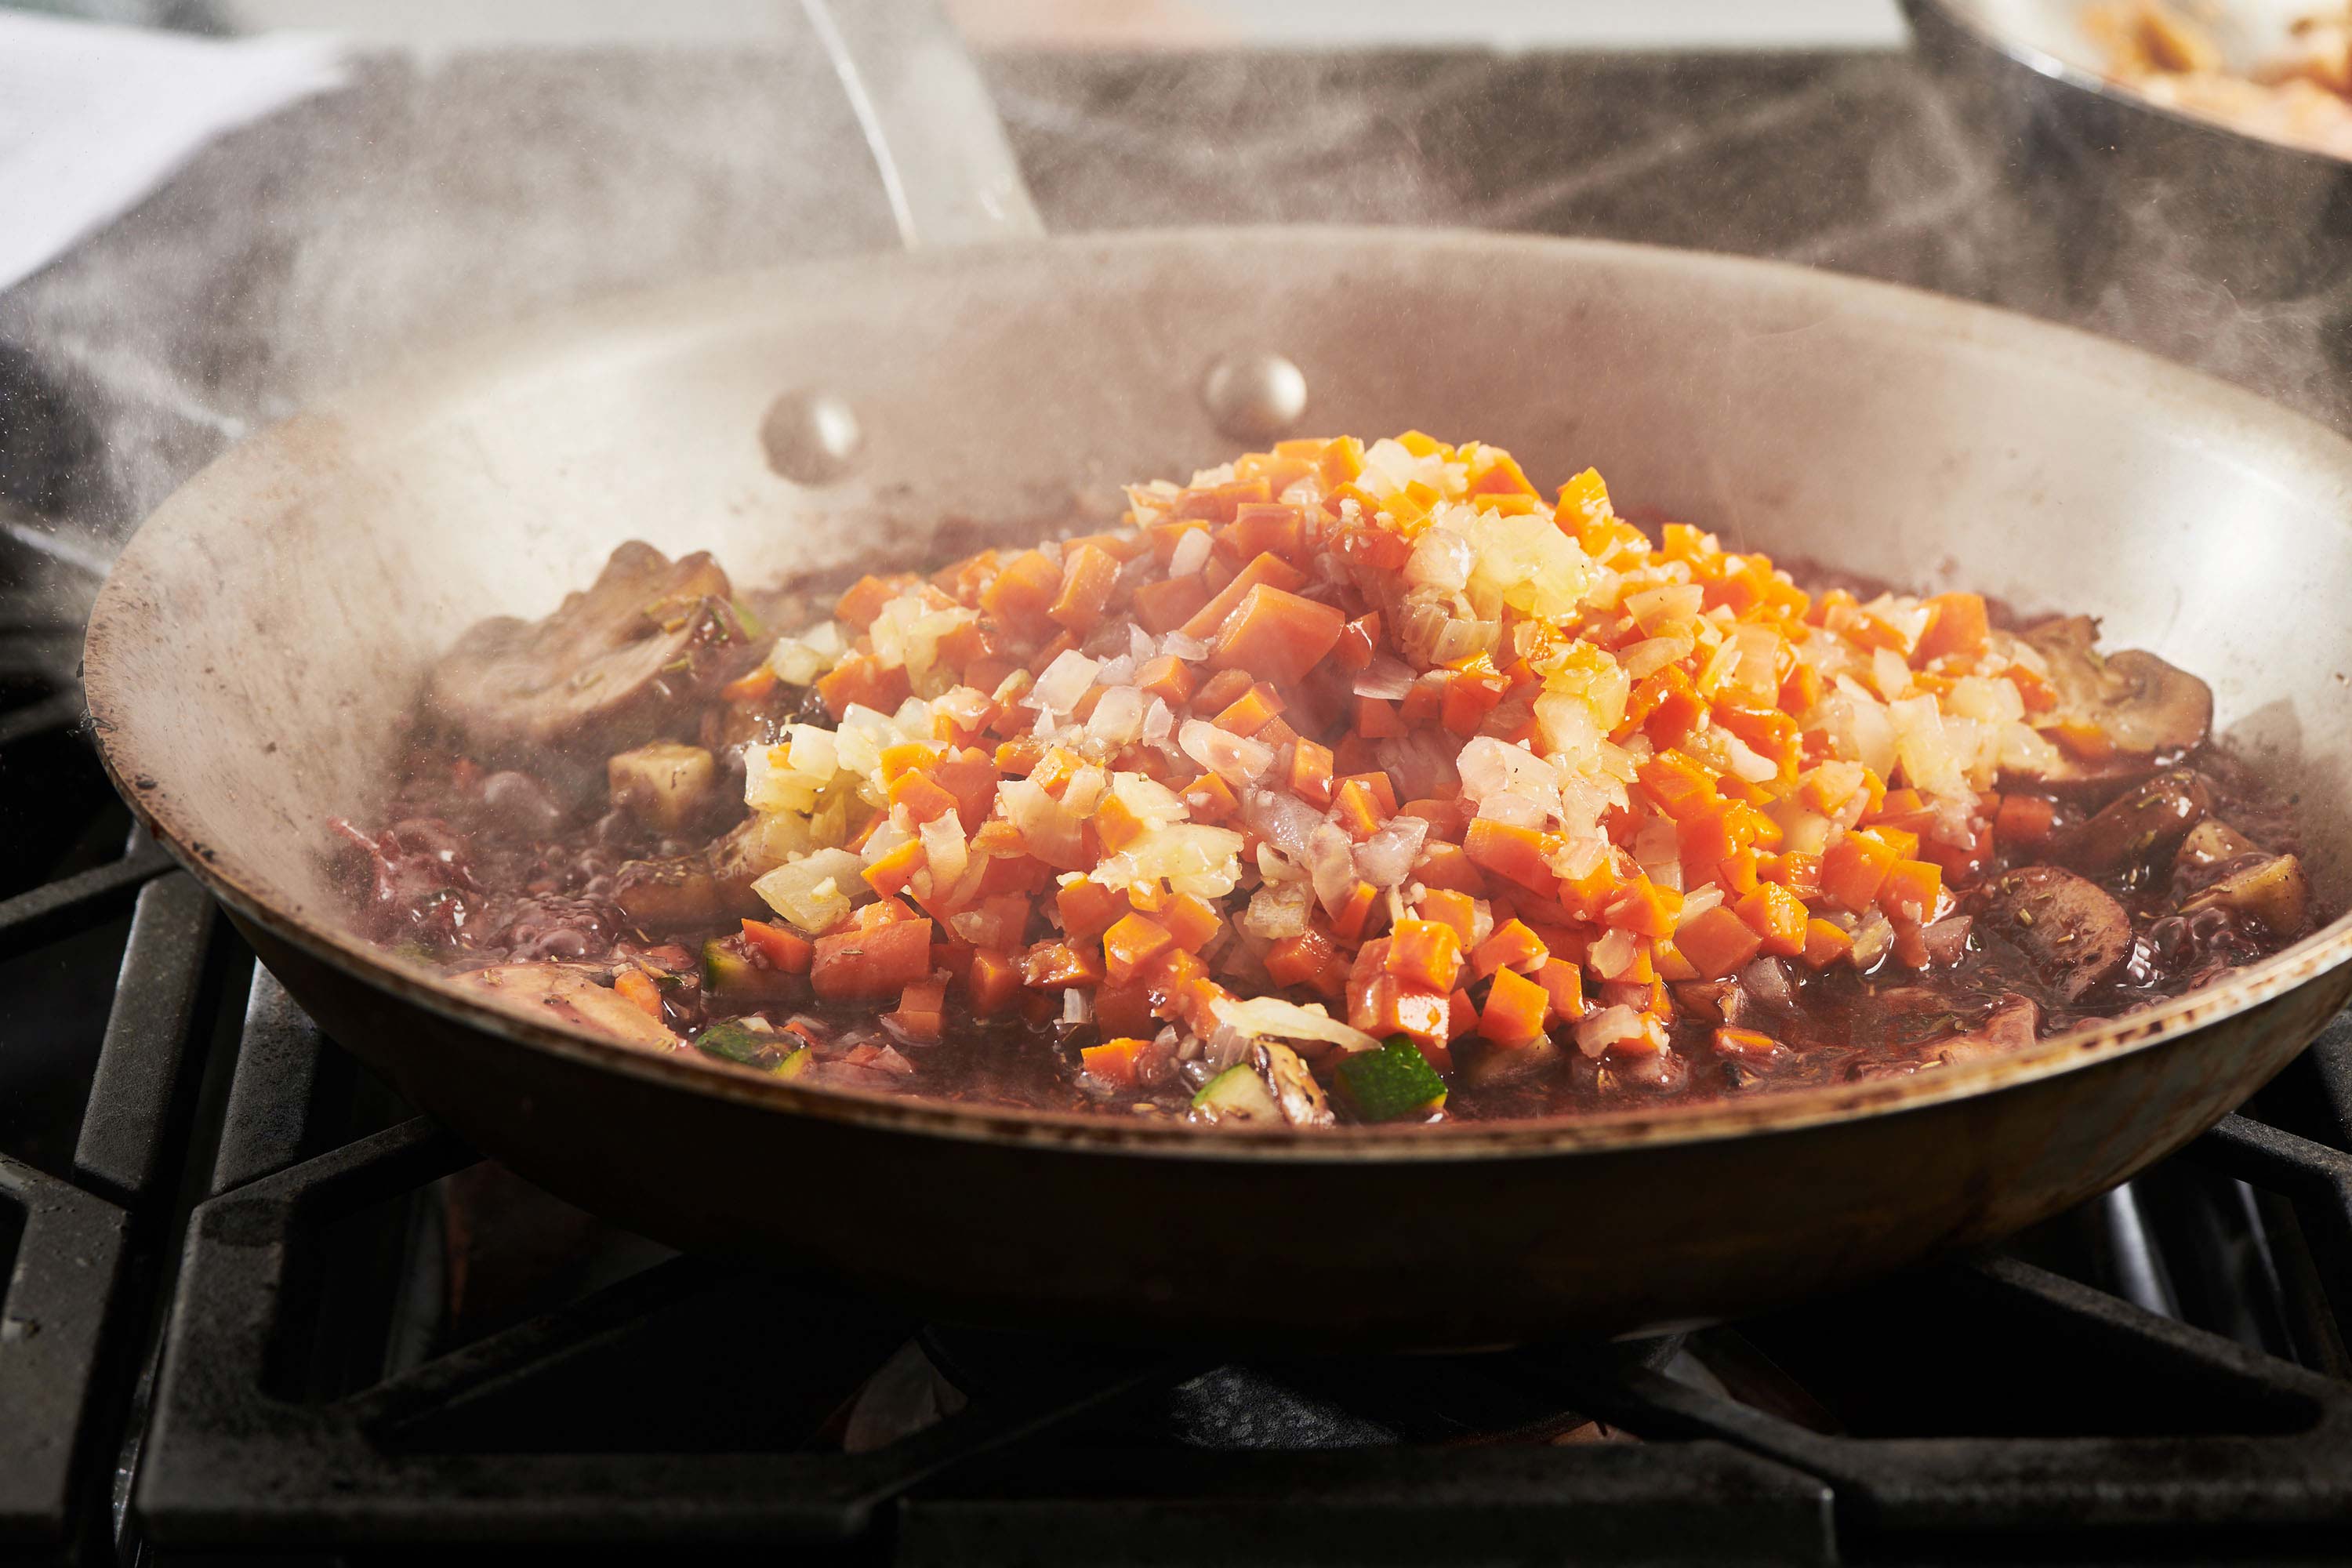 Steaming skillet of chopped vegetables.